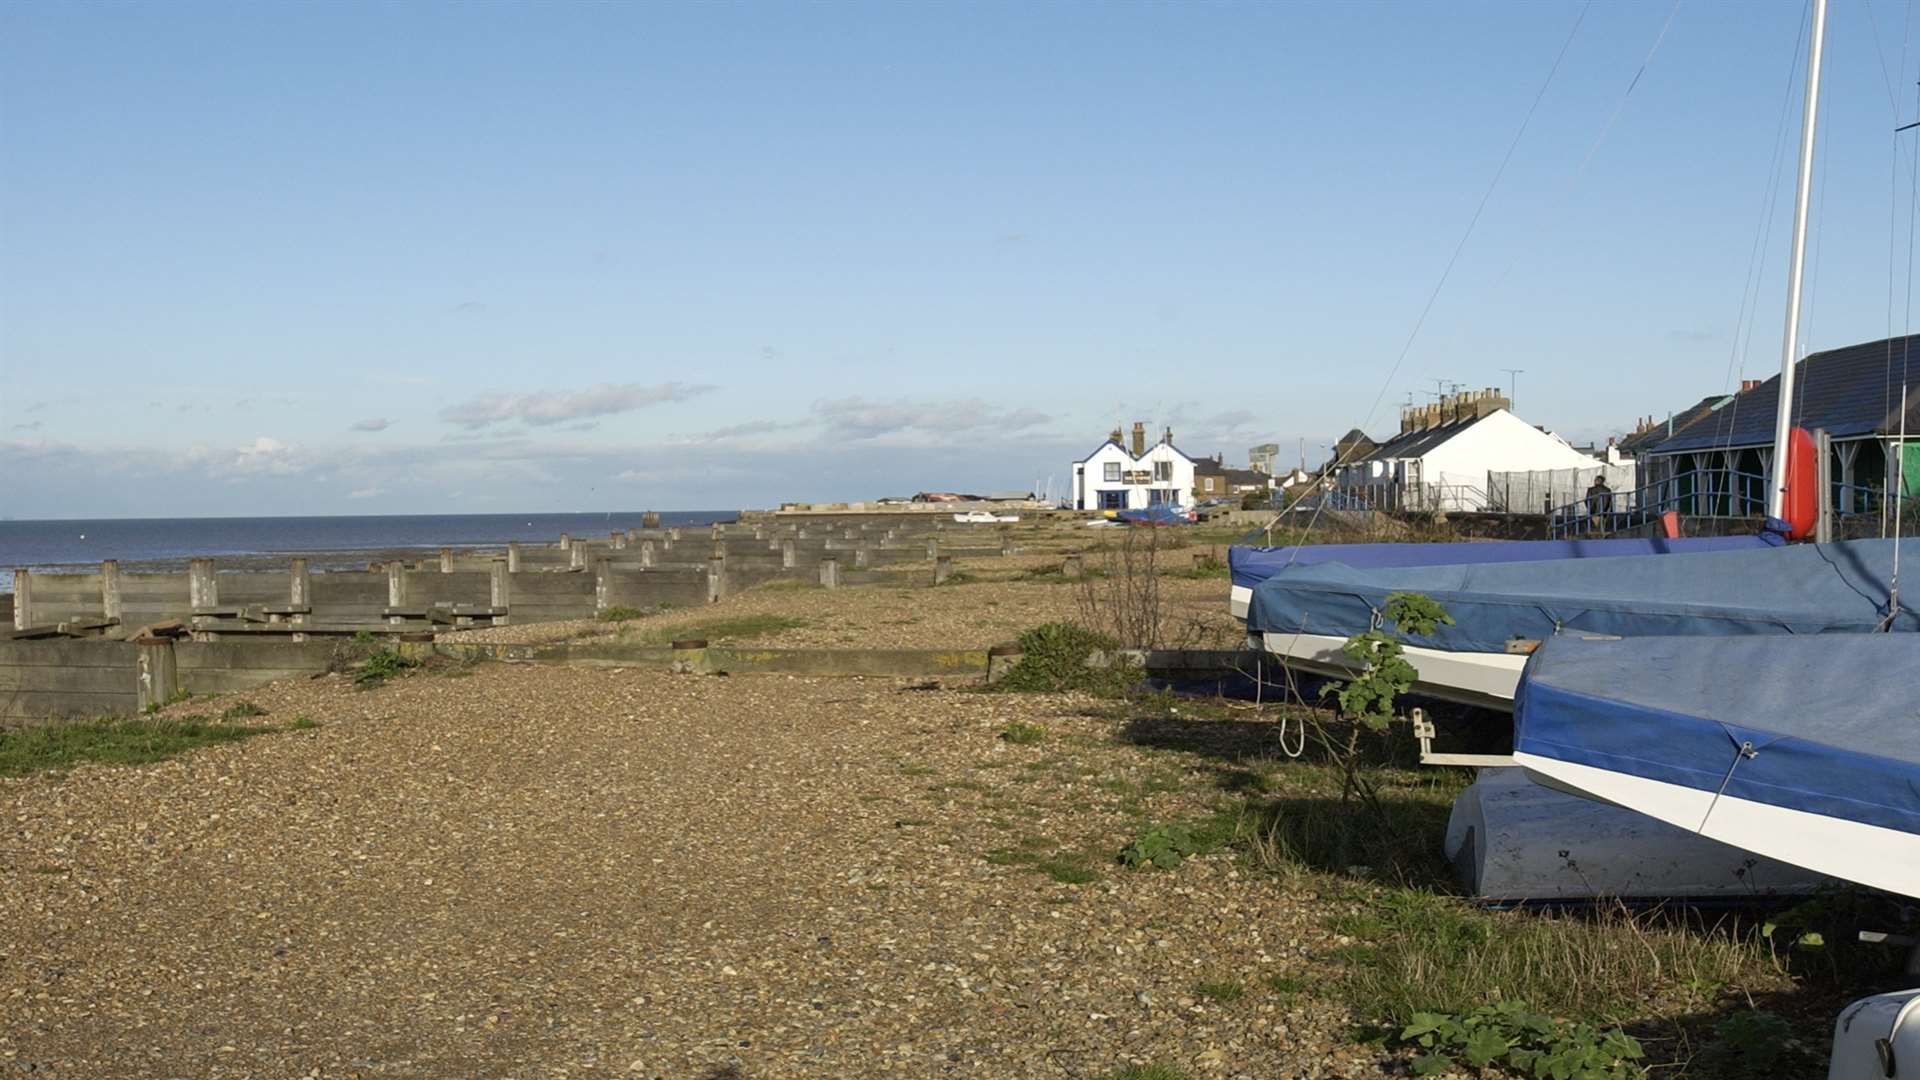 Whitstable has proved attractive to second home buyers